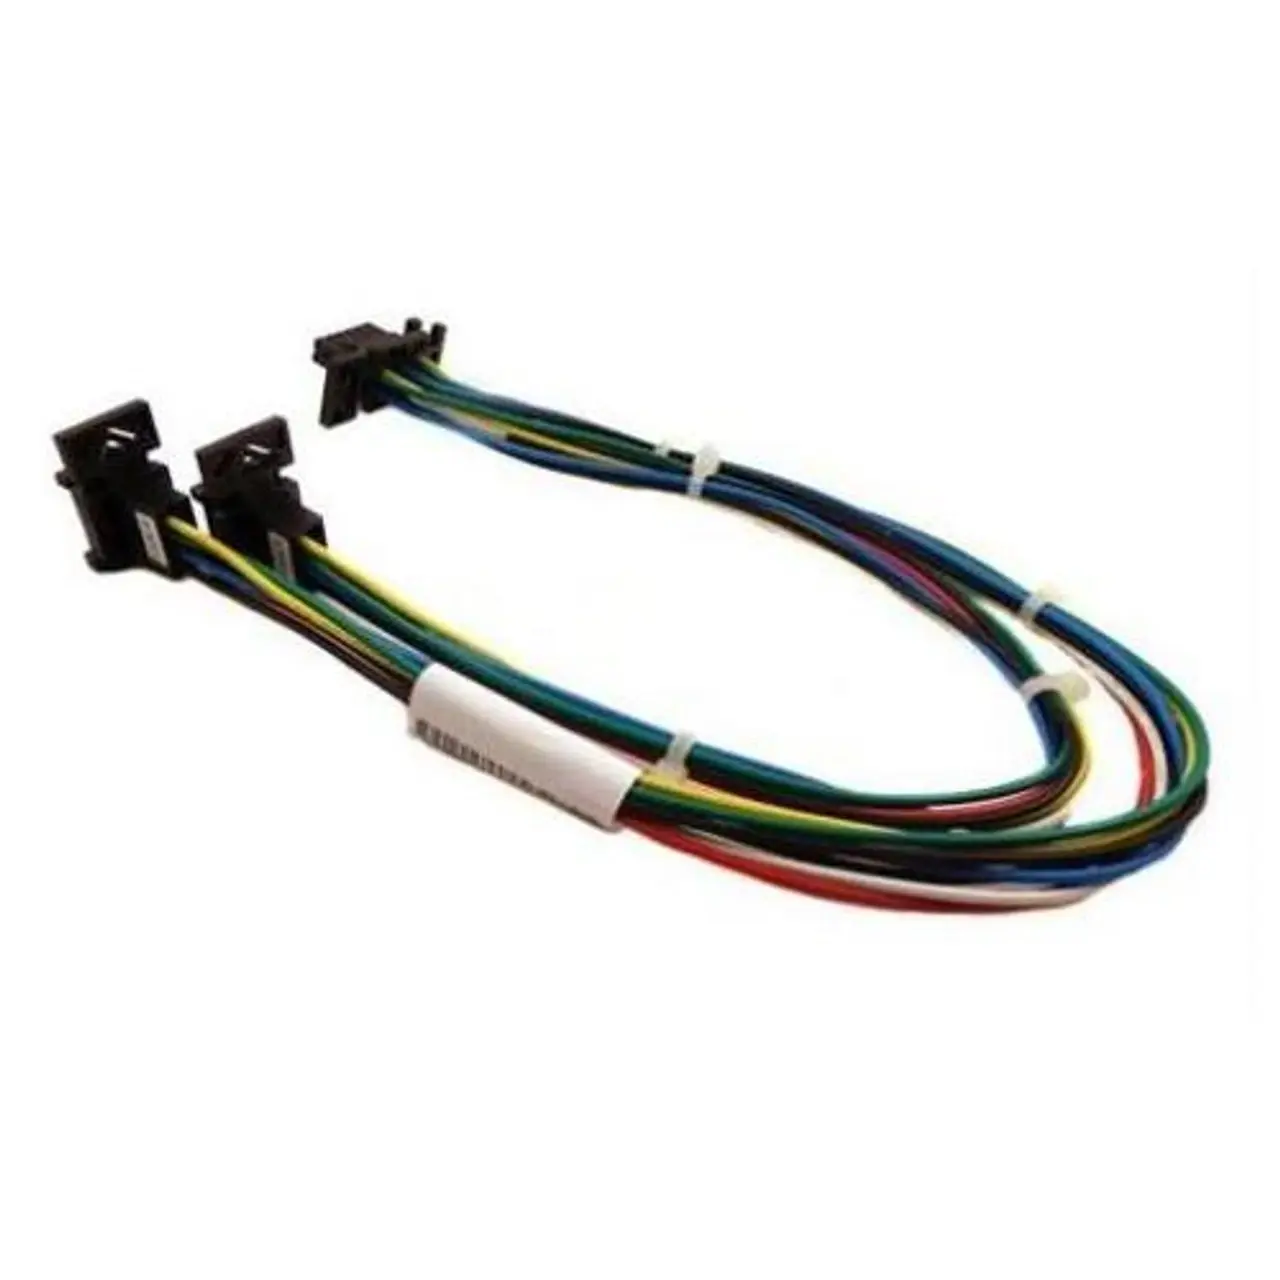 03K9317 IBM RS485 Internal Cable Assembly